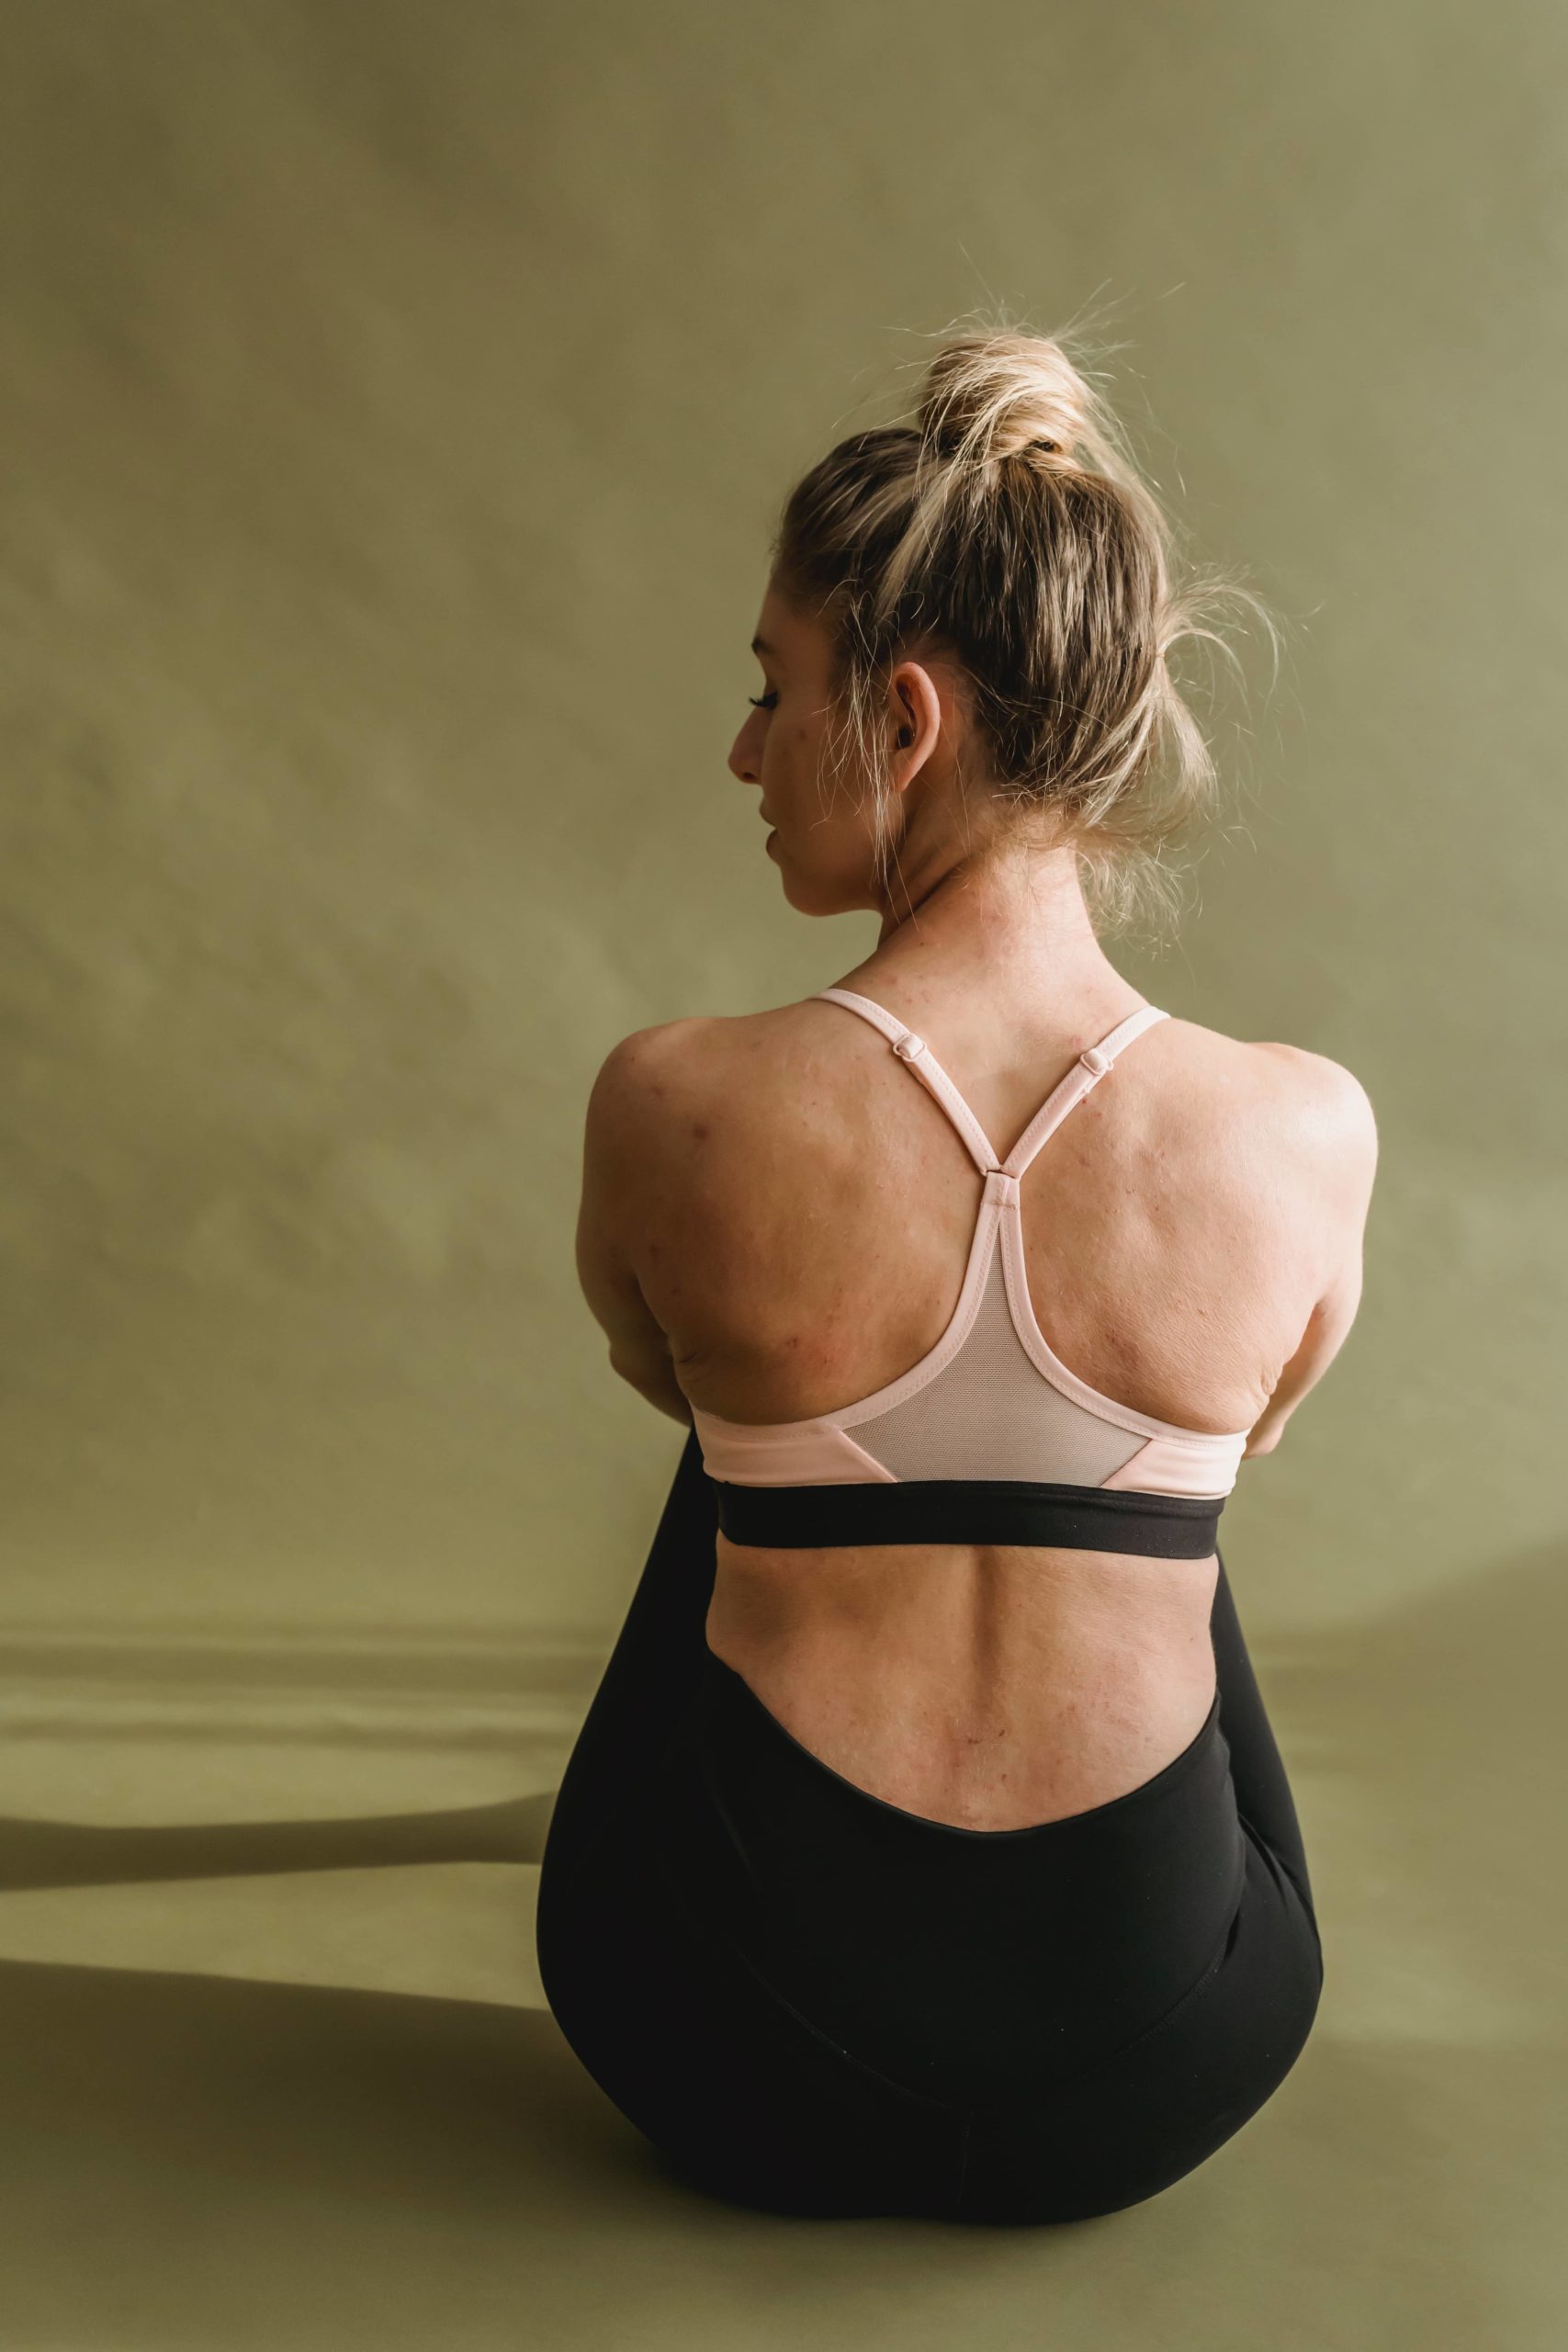 How Mantra Can Improve Your Posture and Alignment